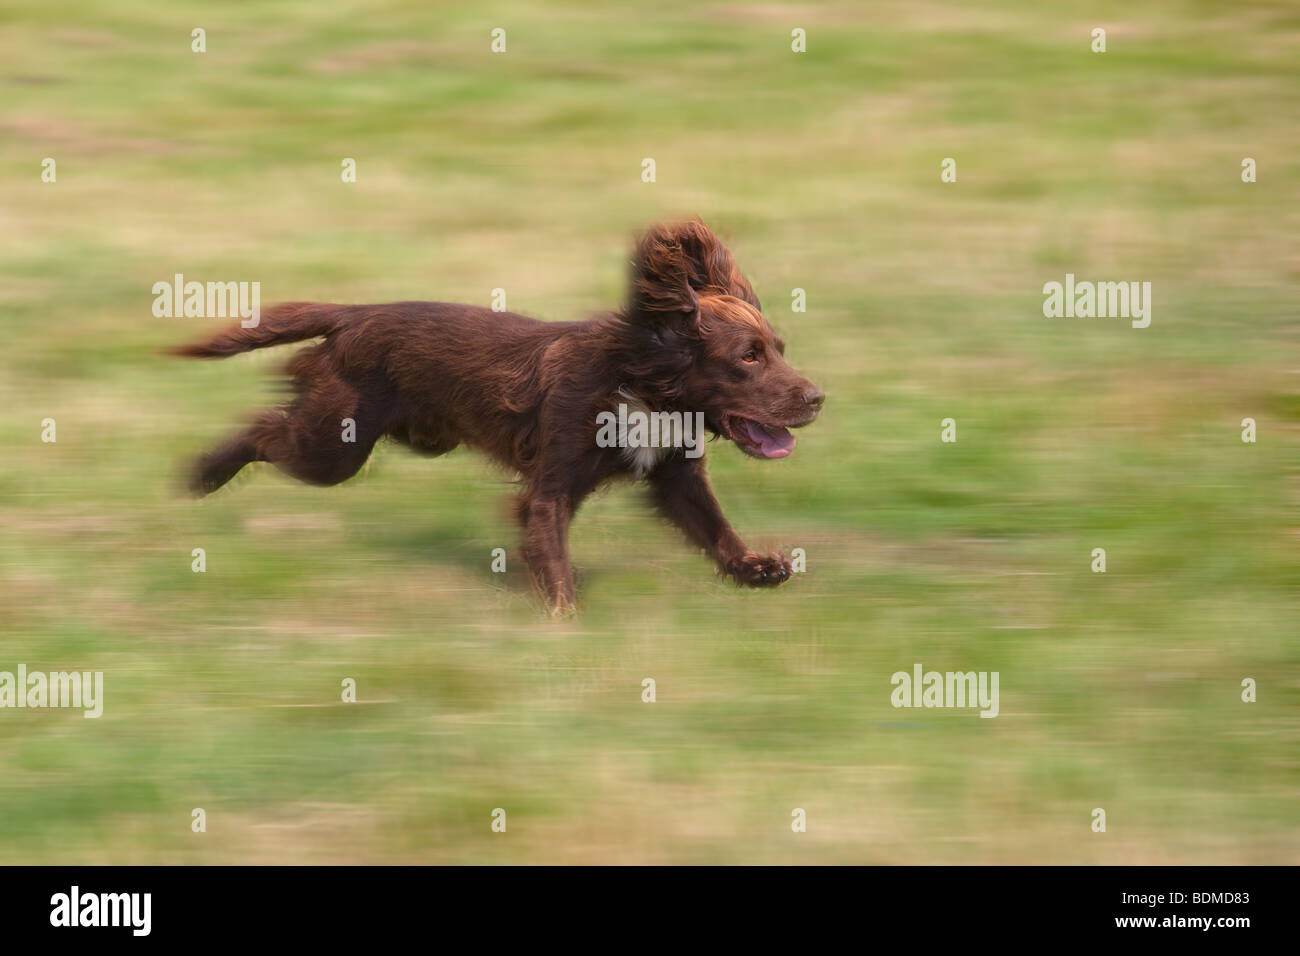 English Springer Spaniel running on grass field Banque D'Images